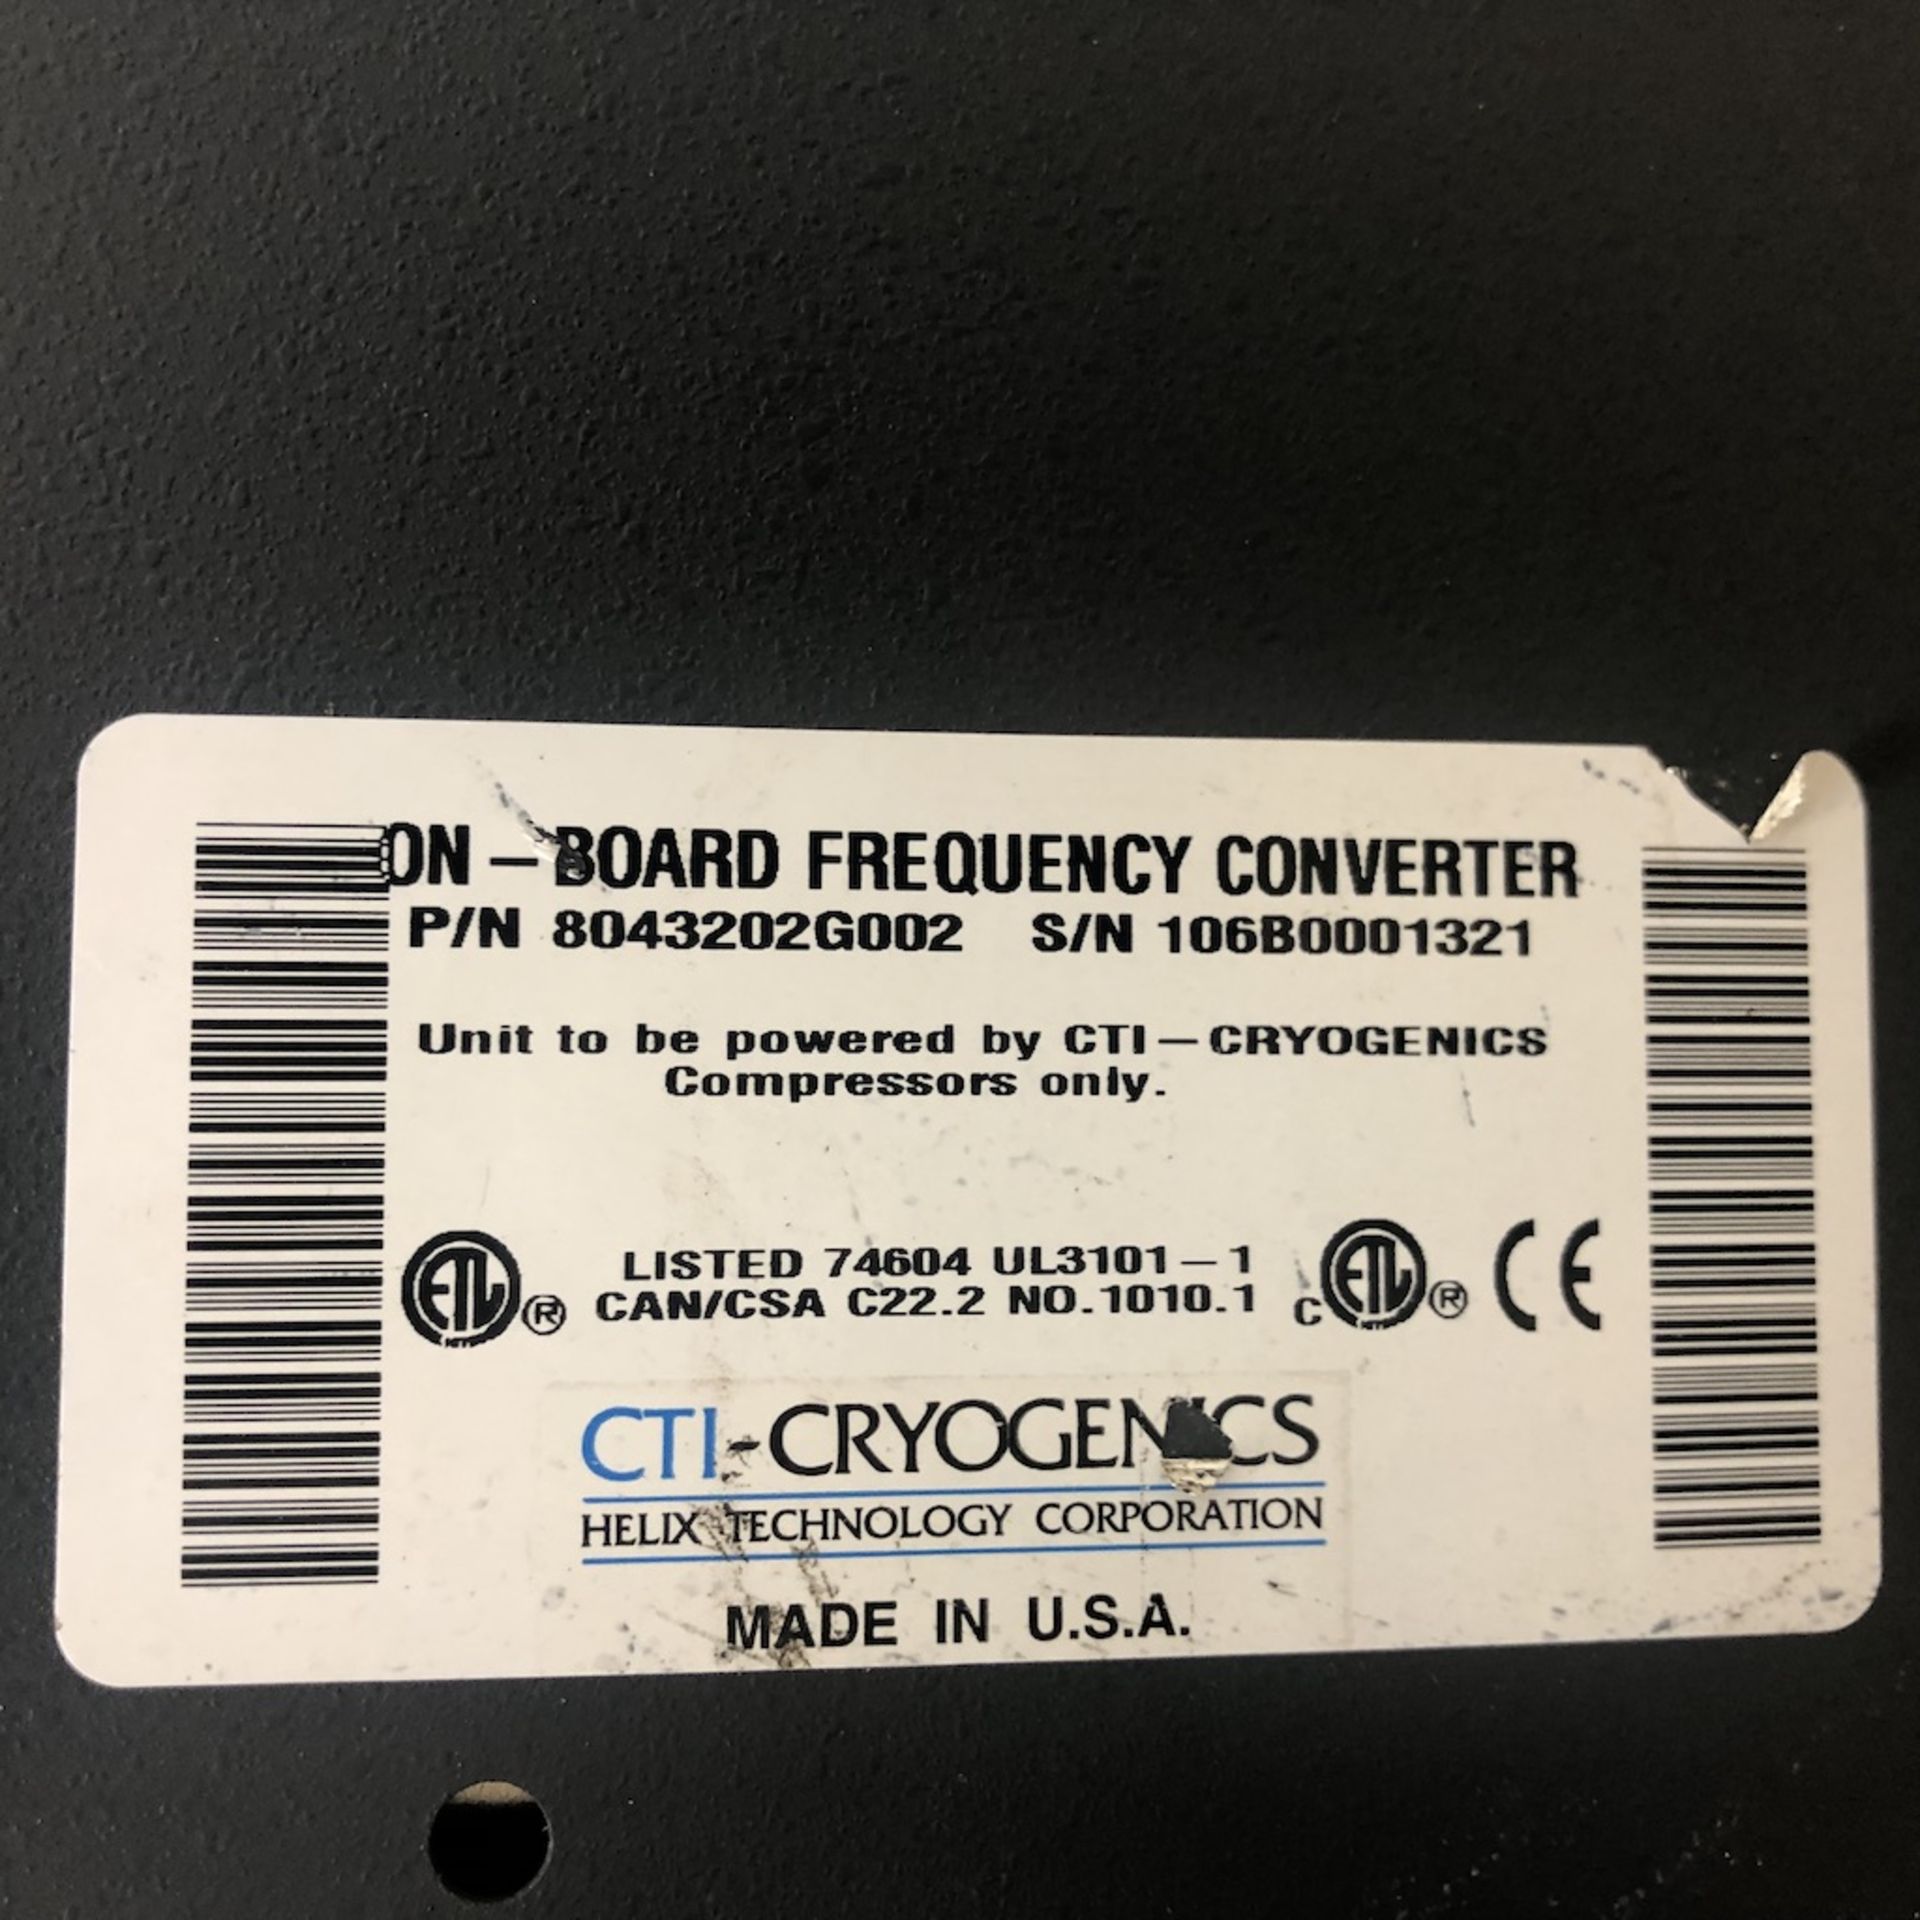 CTI CRYOGENICS HELIX TECHNOLOGY CORPORATION 8043202G002 ON-BOARD FREQUENCY CONVERTER - Image 10 of 10